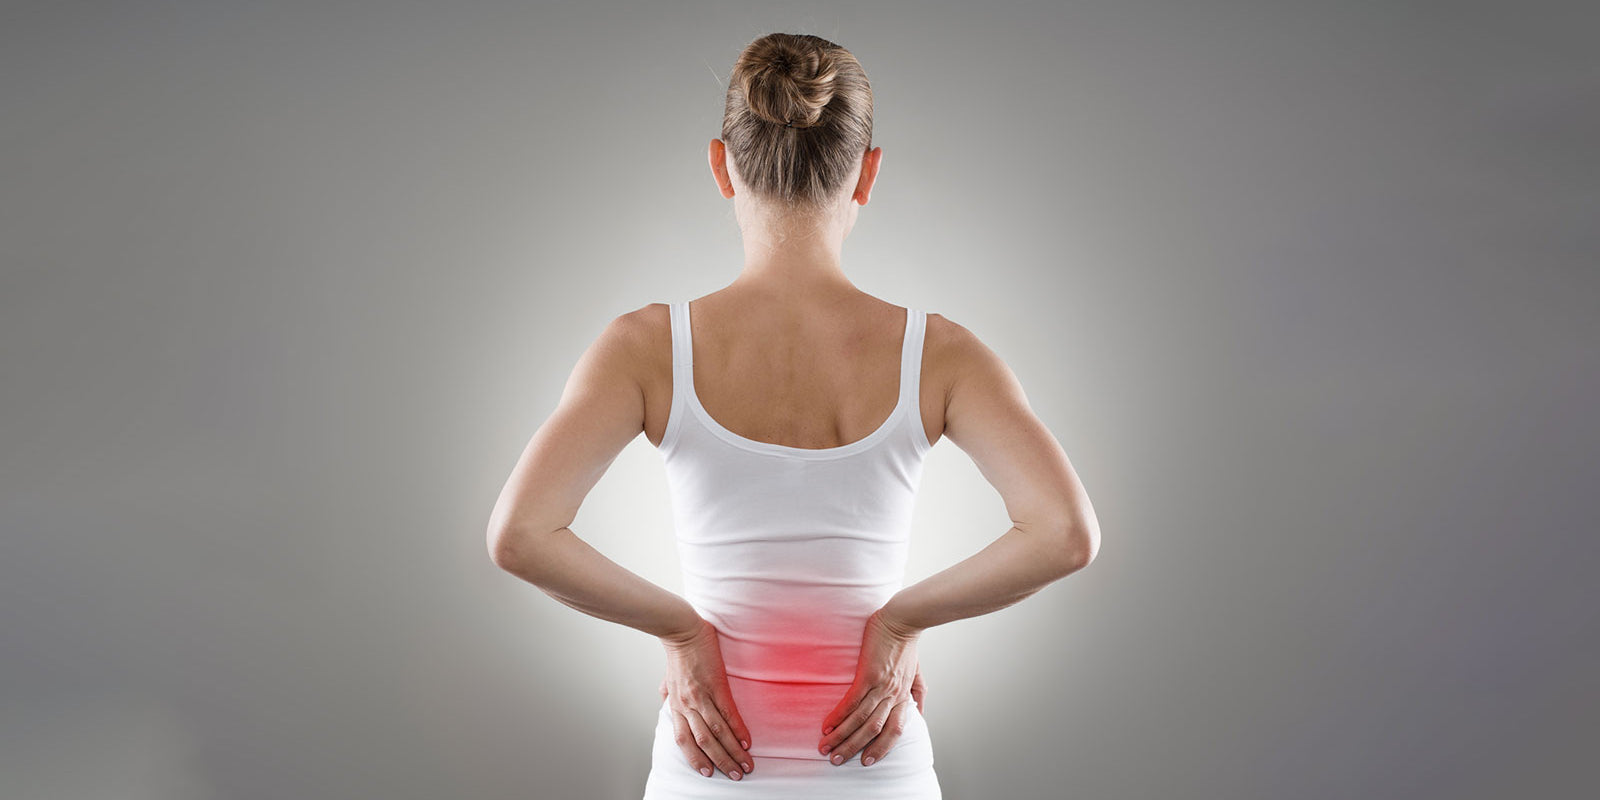 10 Tips to Relieve Lower Back Pain